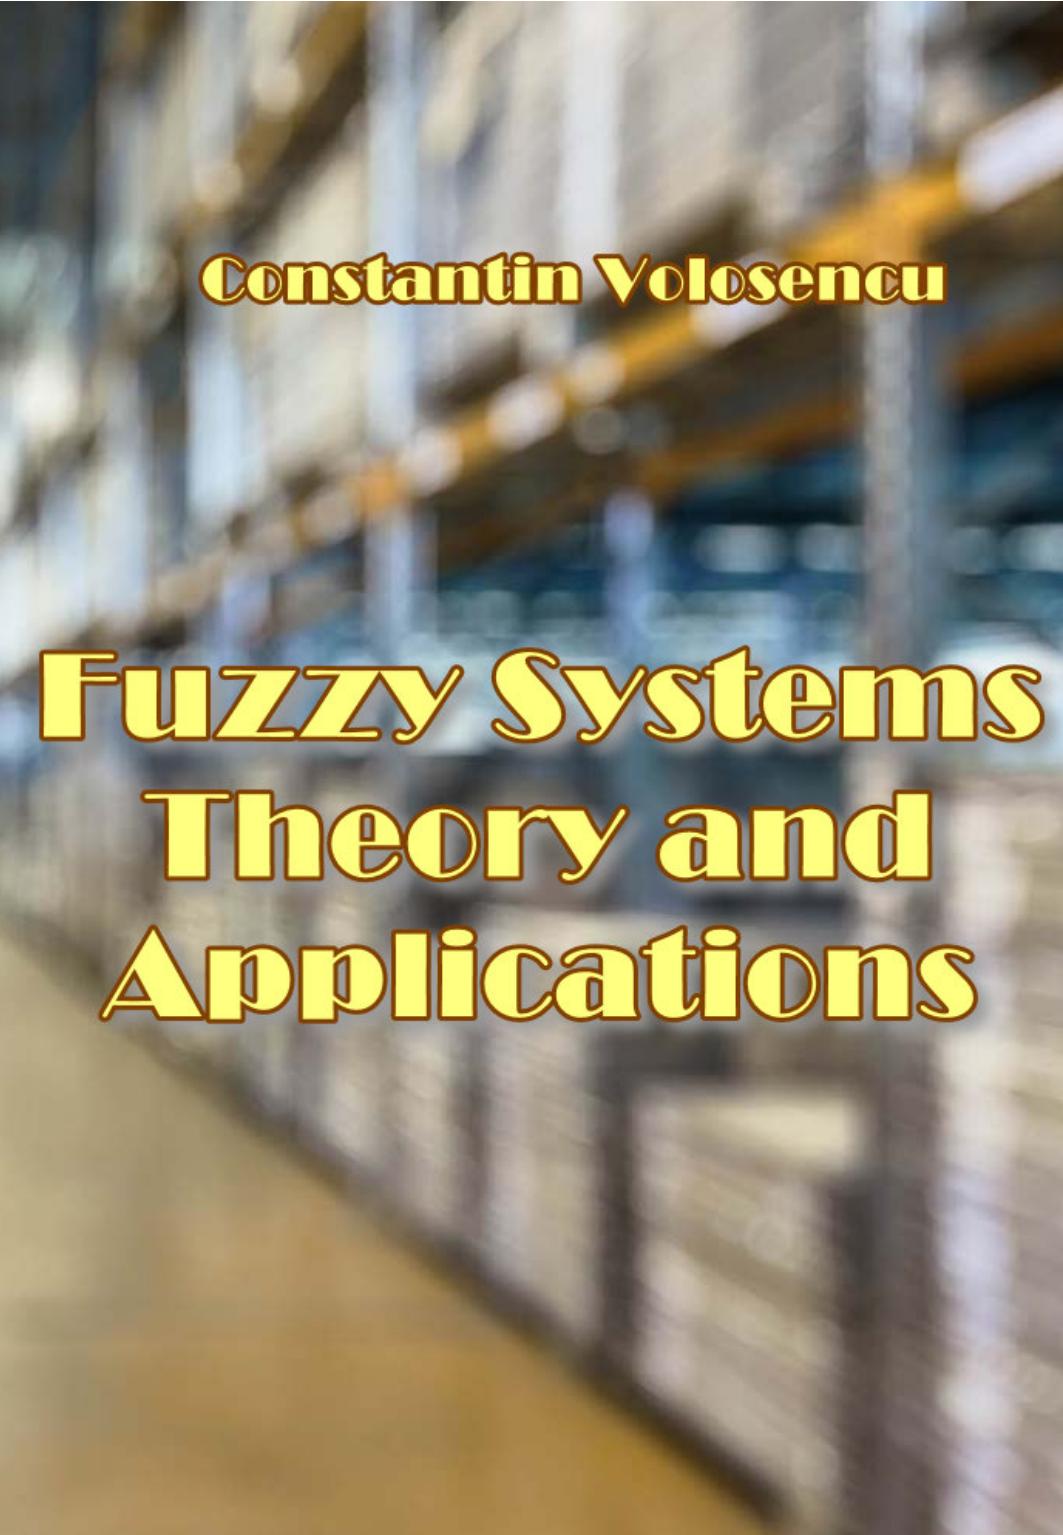 Fuzzy Techniques: Theory and Applications